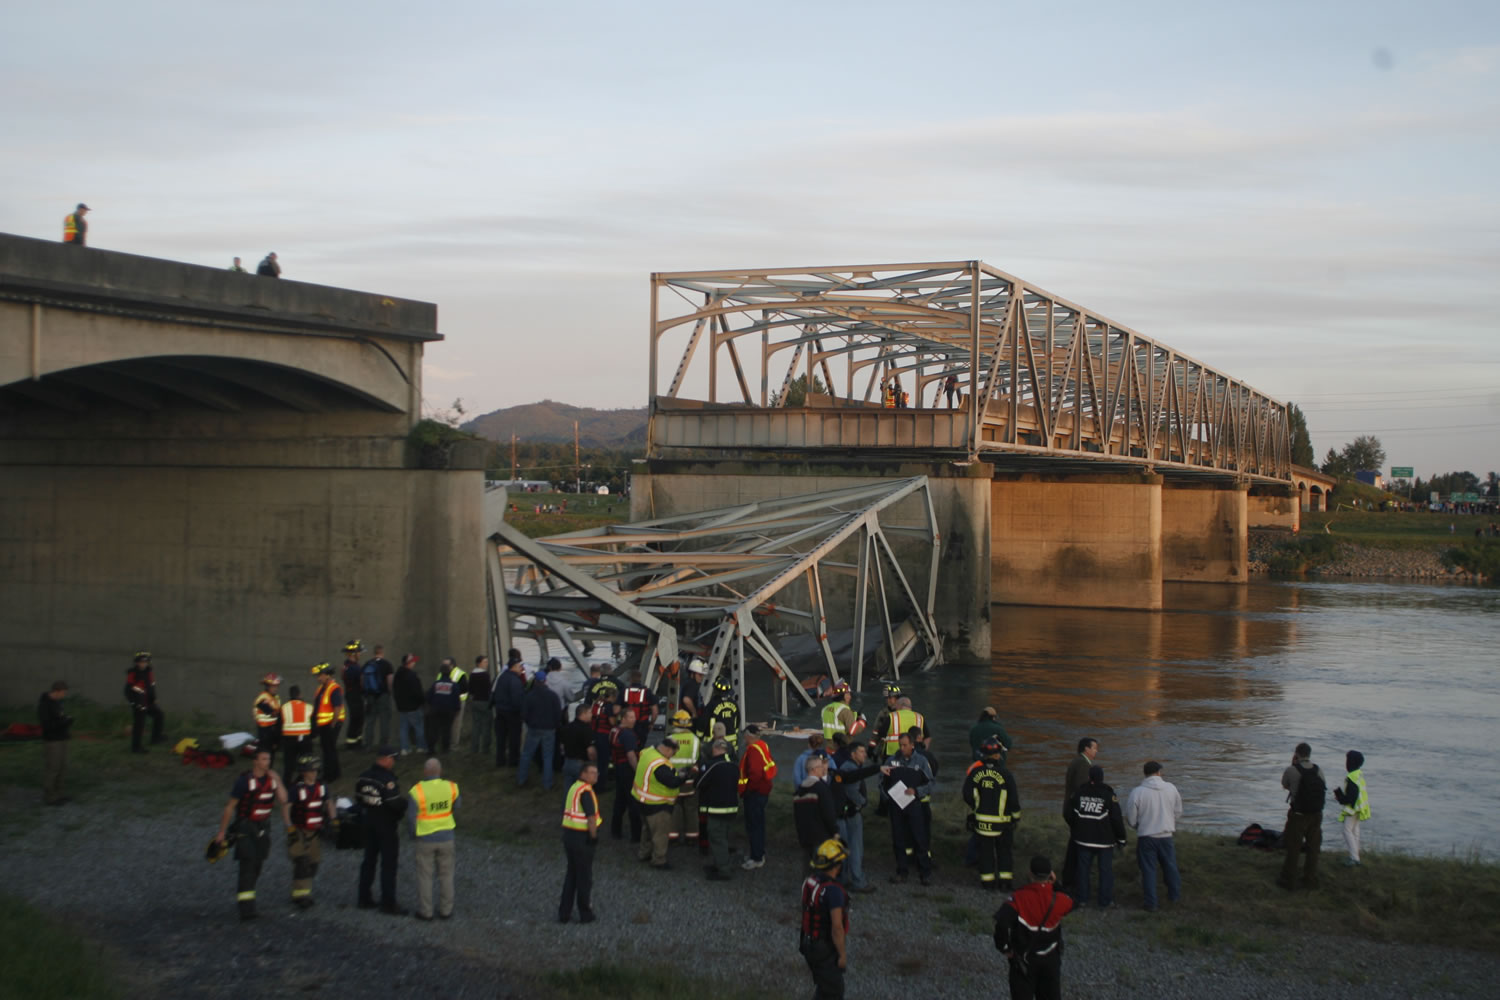 A portion of the Interstate-5 bridge is submerged after it collapsed into the Skagit river dumping vehicles and people into the water in Mount Vernon on Thursday.